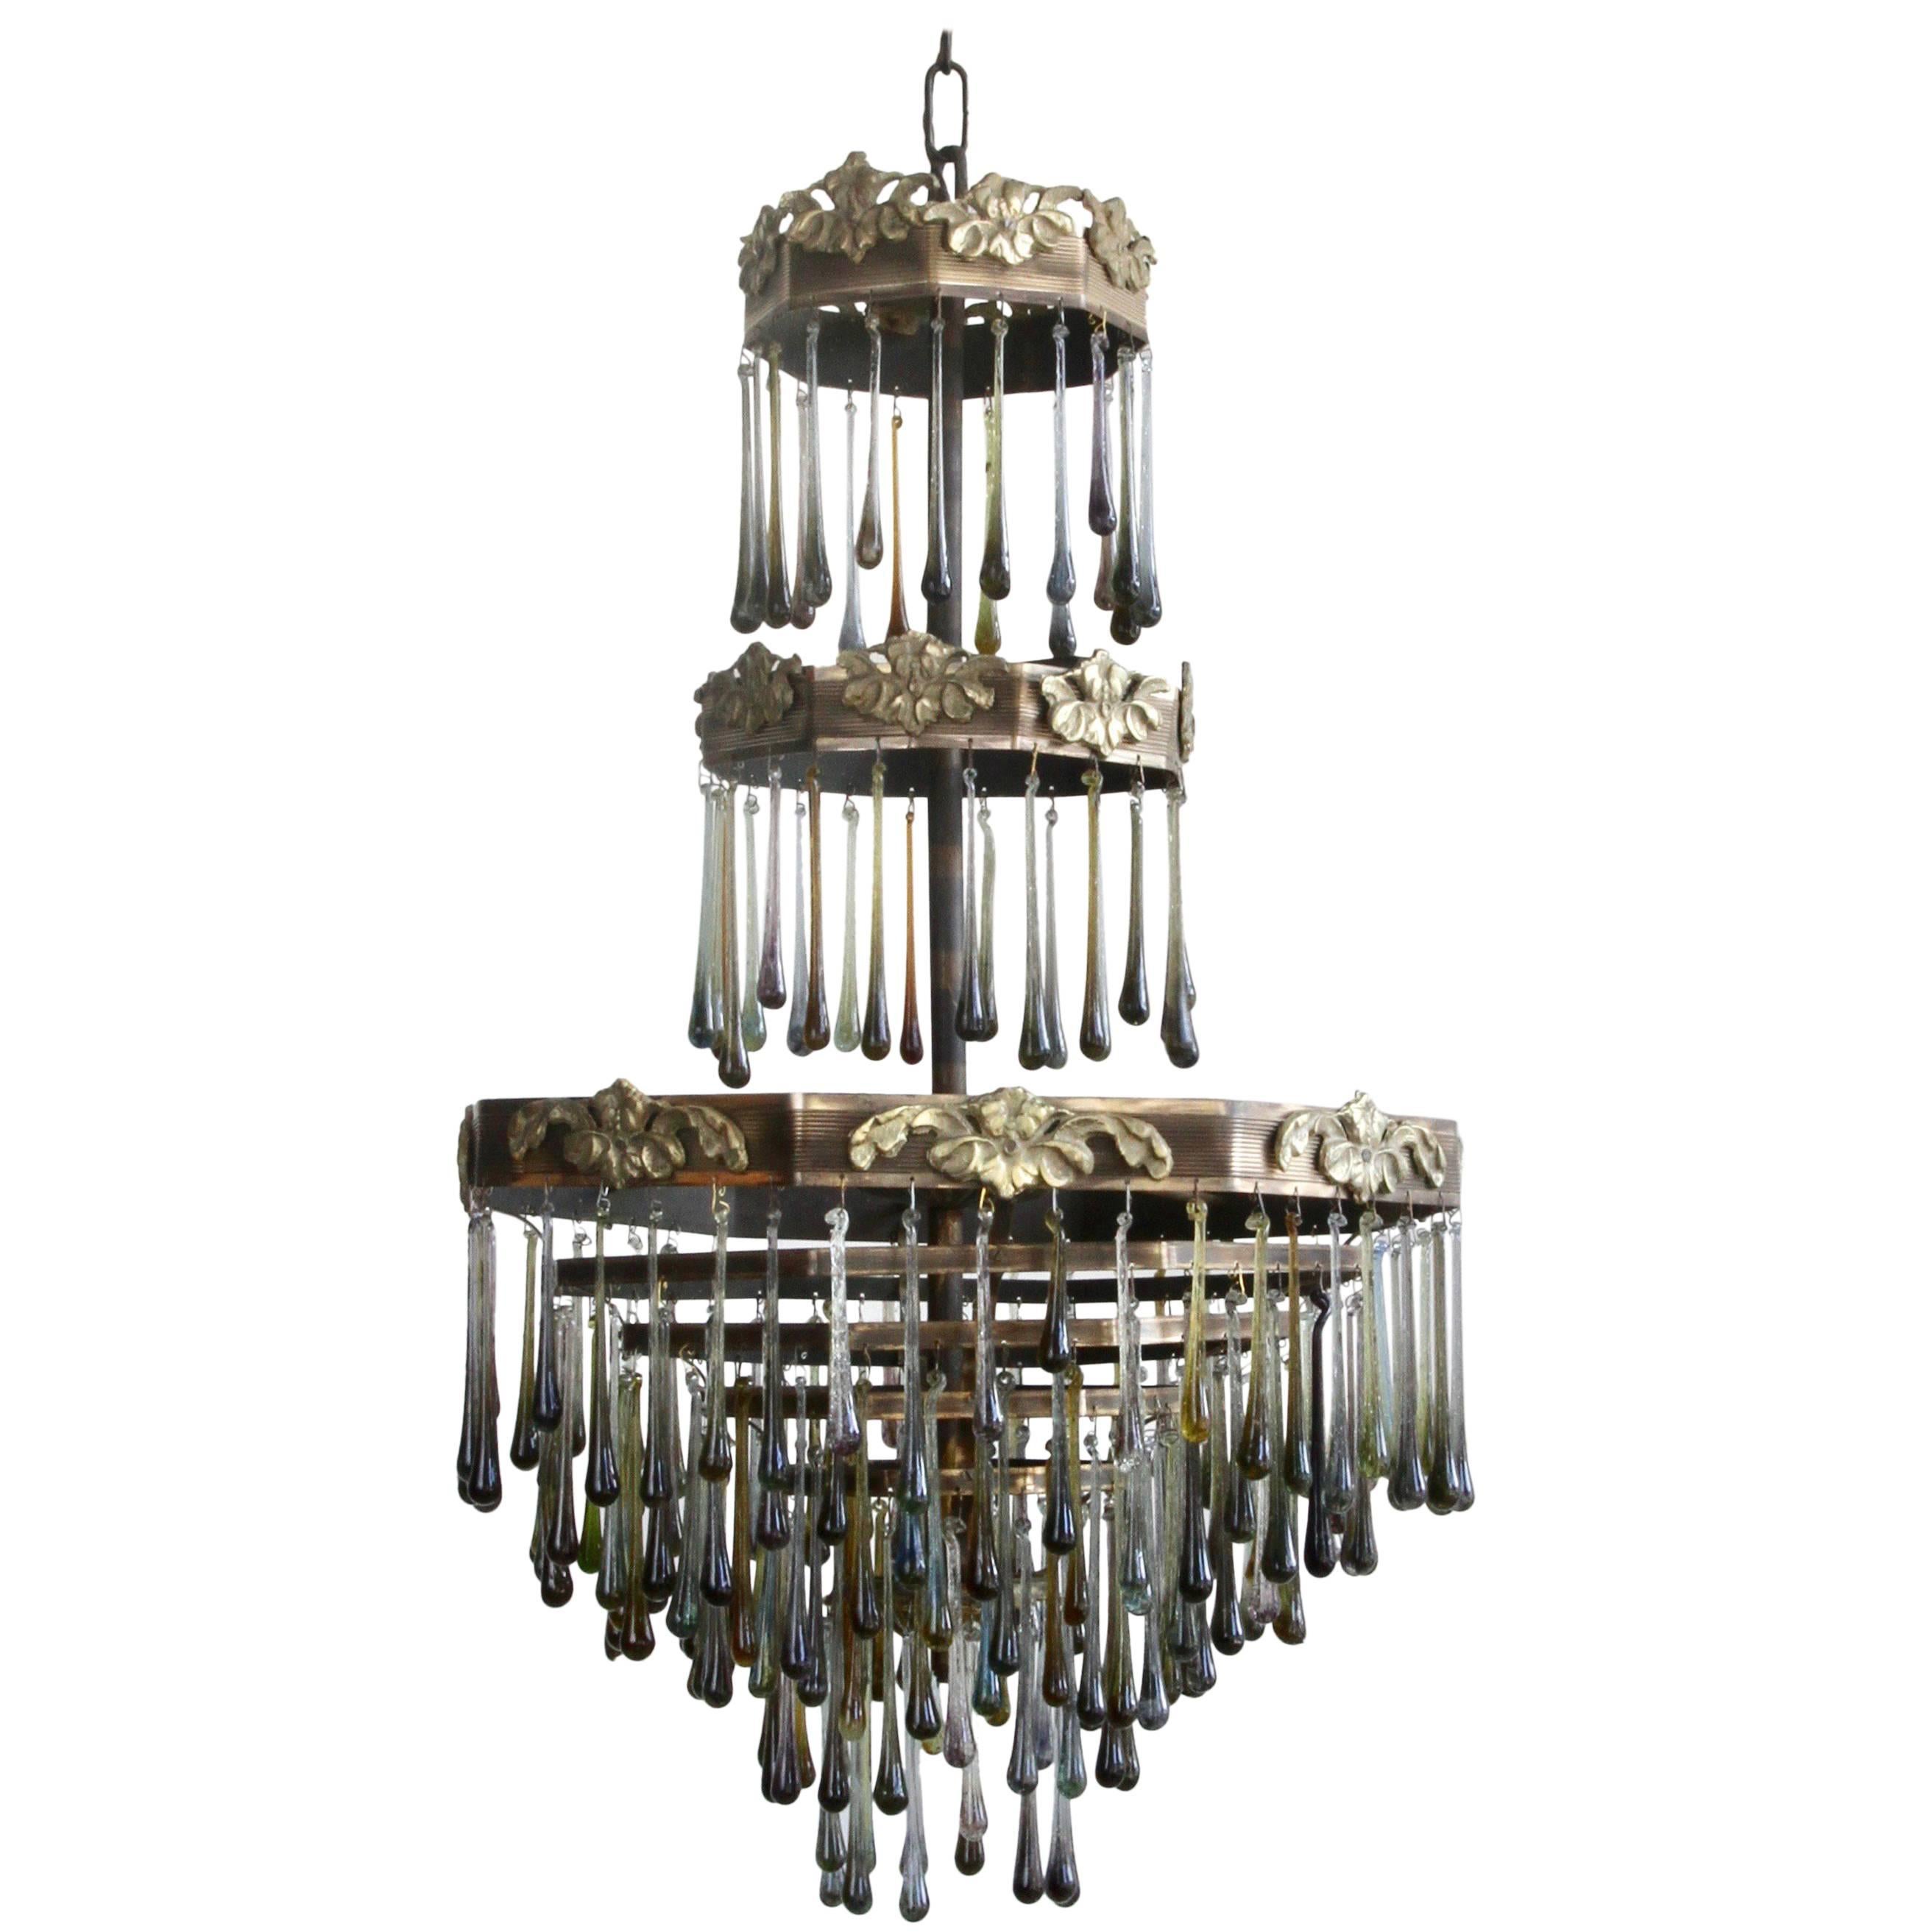 1920s Waterfall Chandelier with Contemporary Teardrops